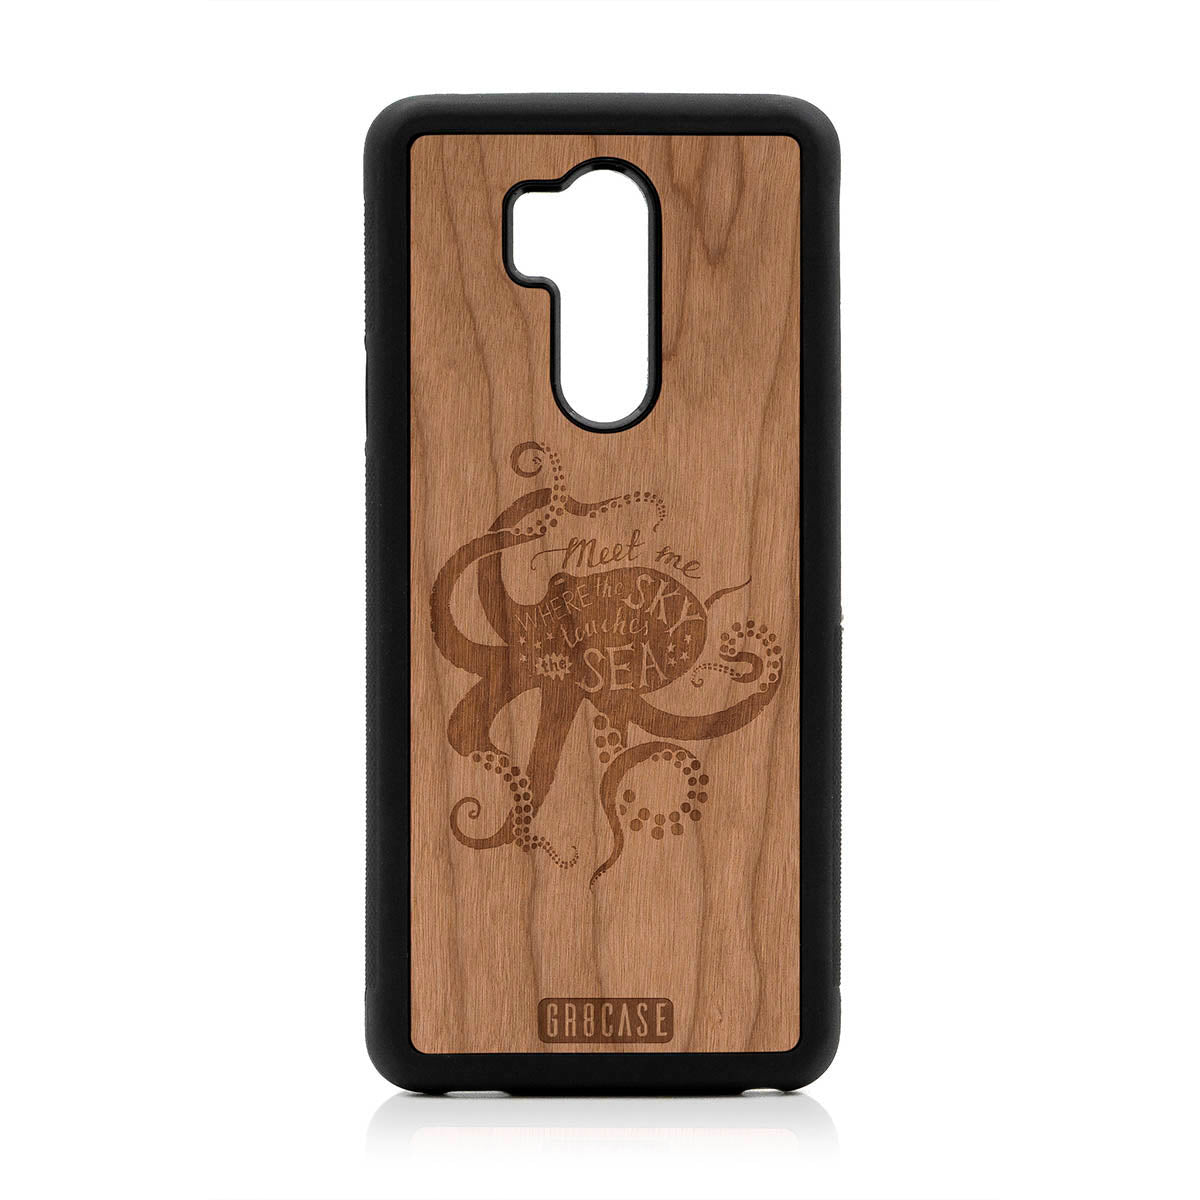 Meet Me Where The Sky Touches The Sea (Octopus) Design Wood Case For LG G7 ThinQ